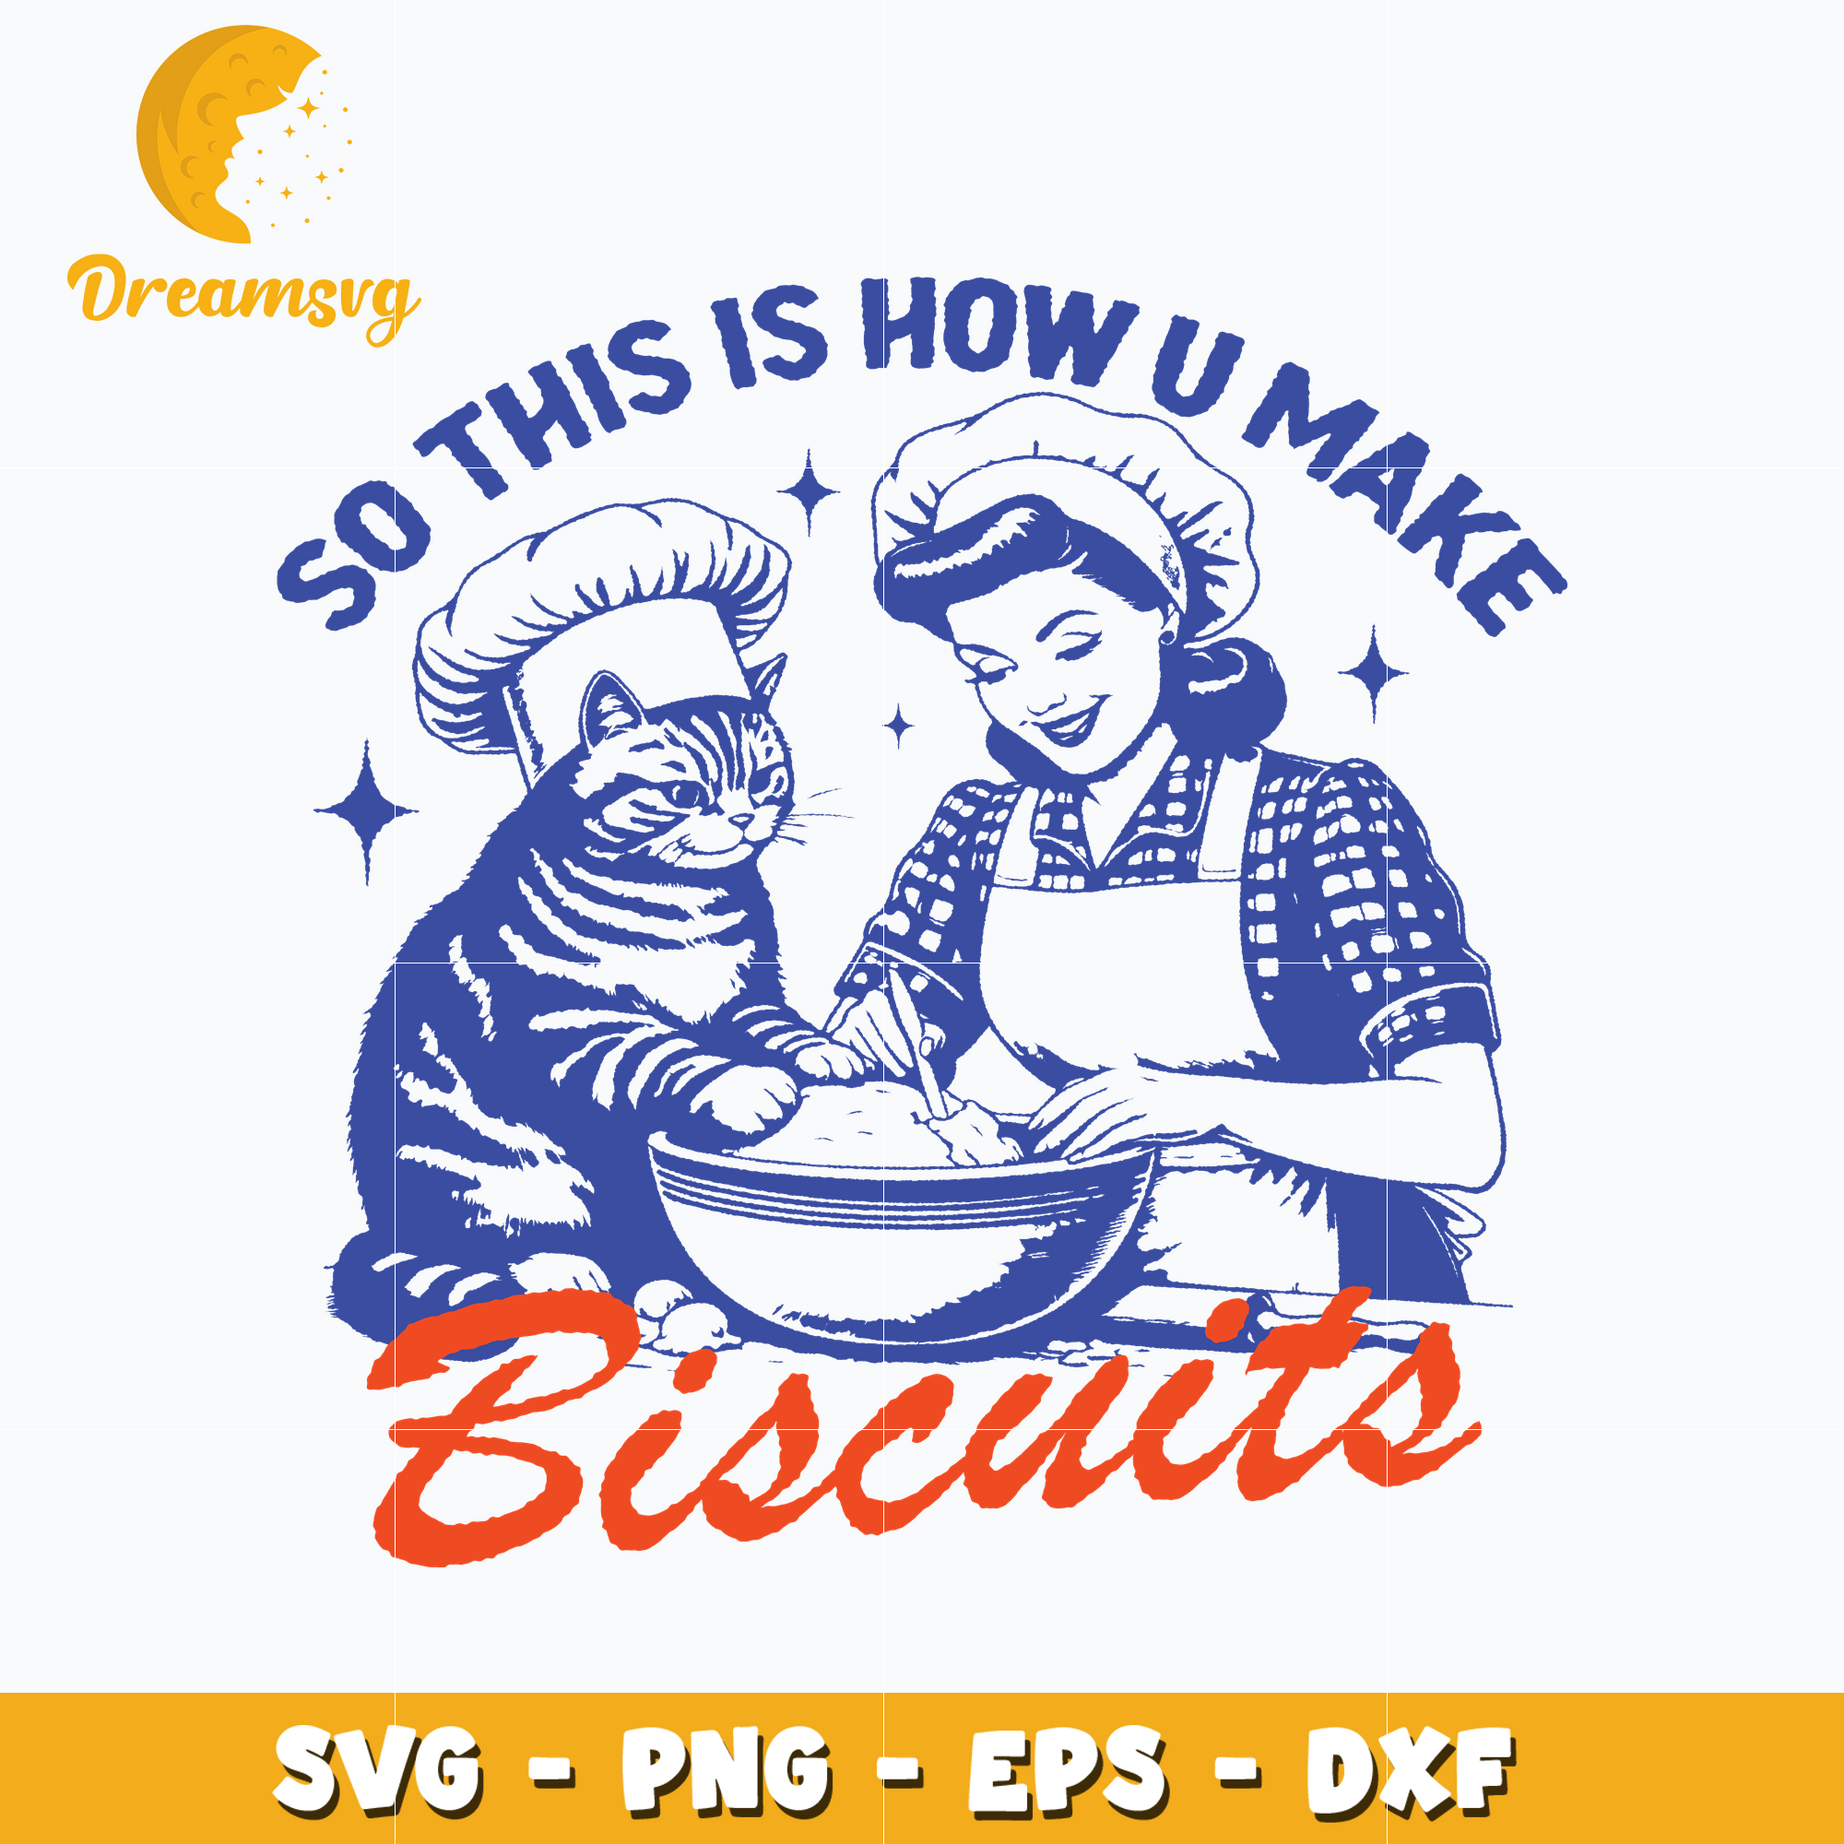 So this is how u make biscuits SVG